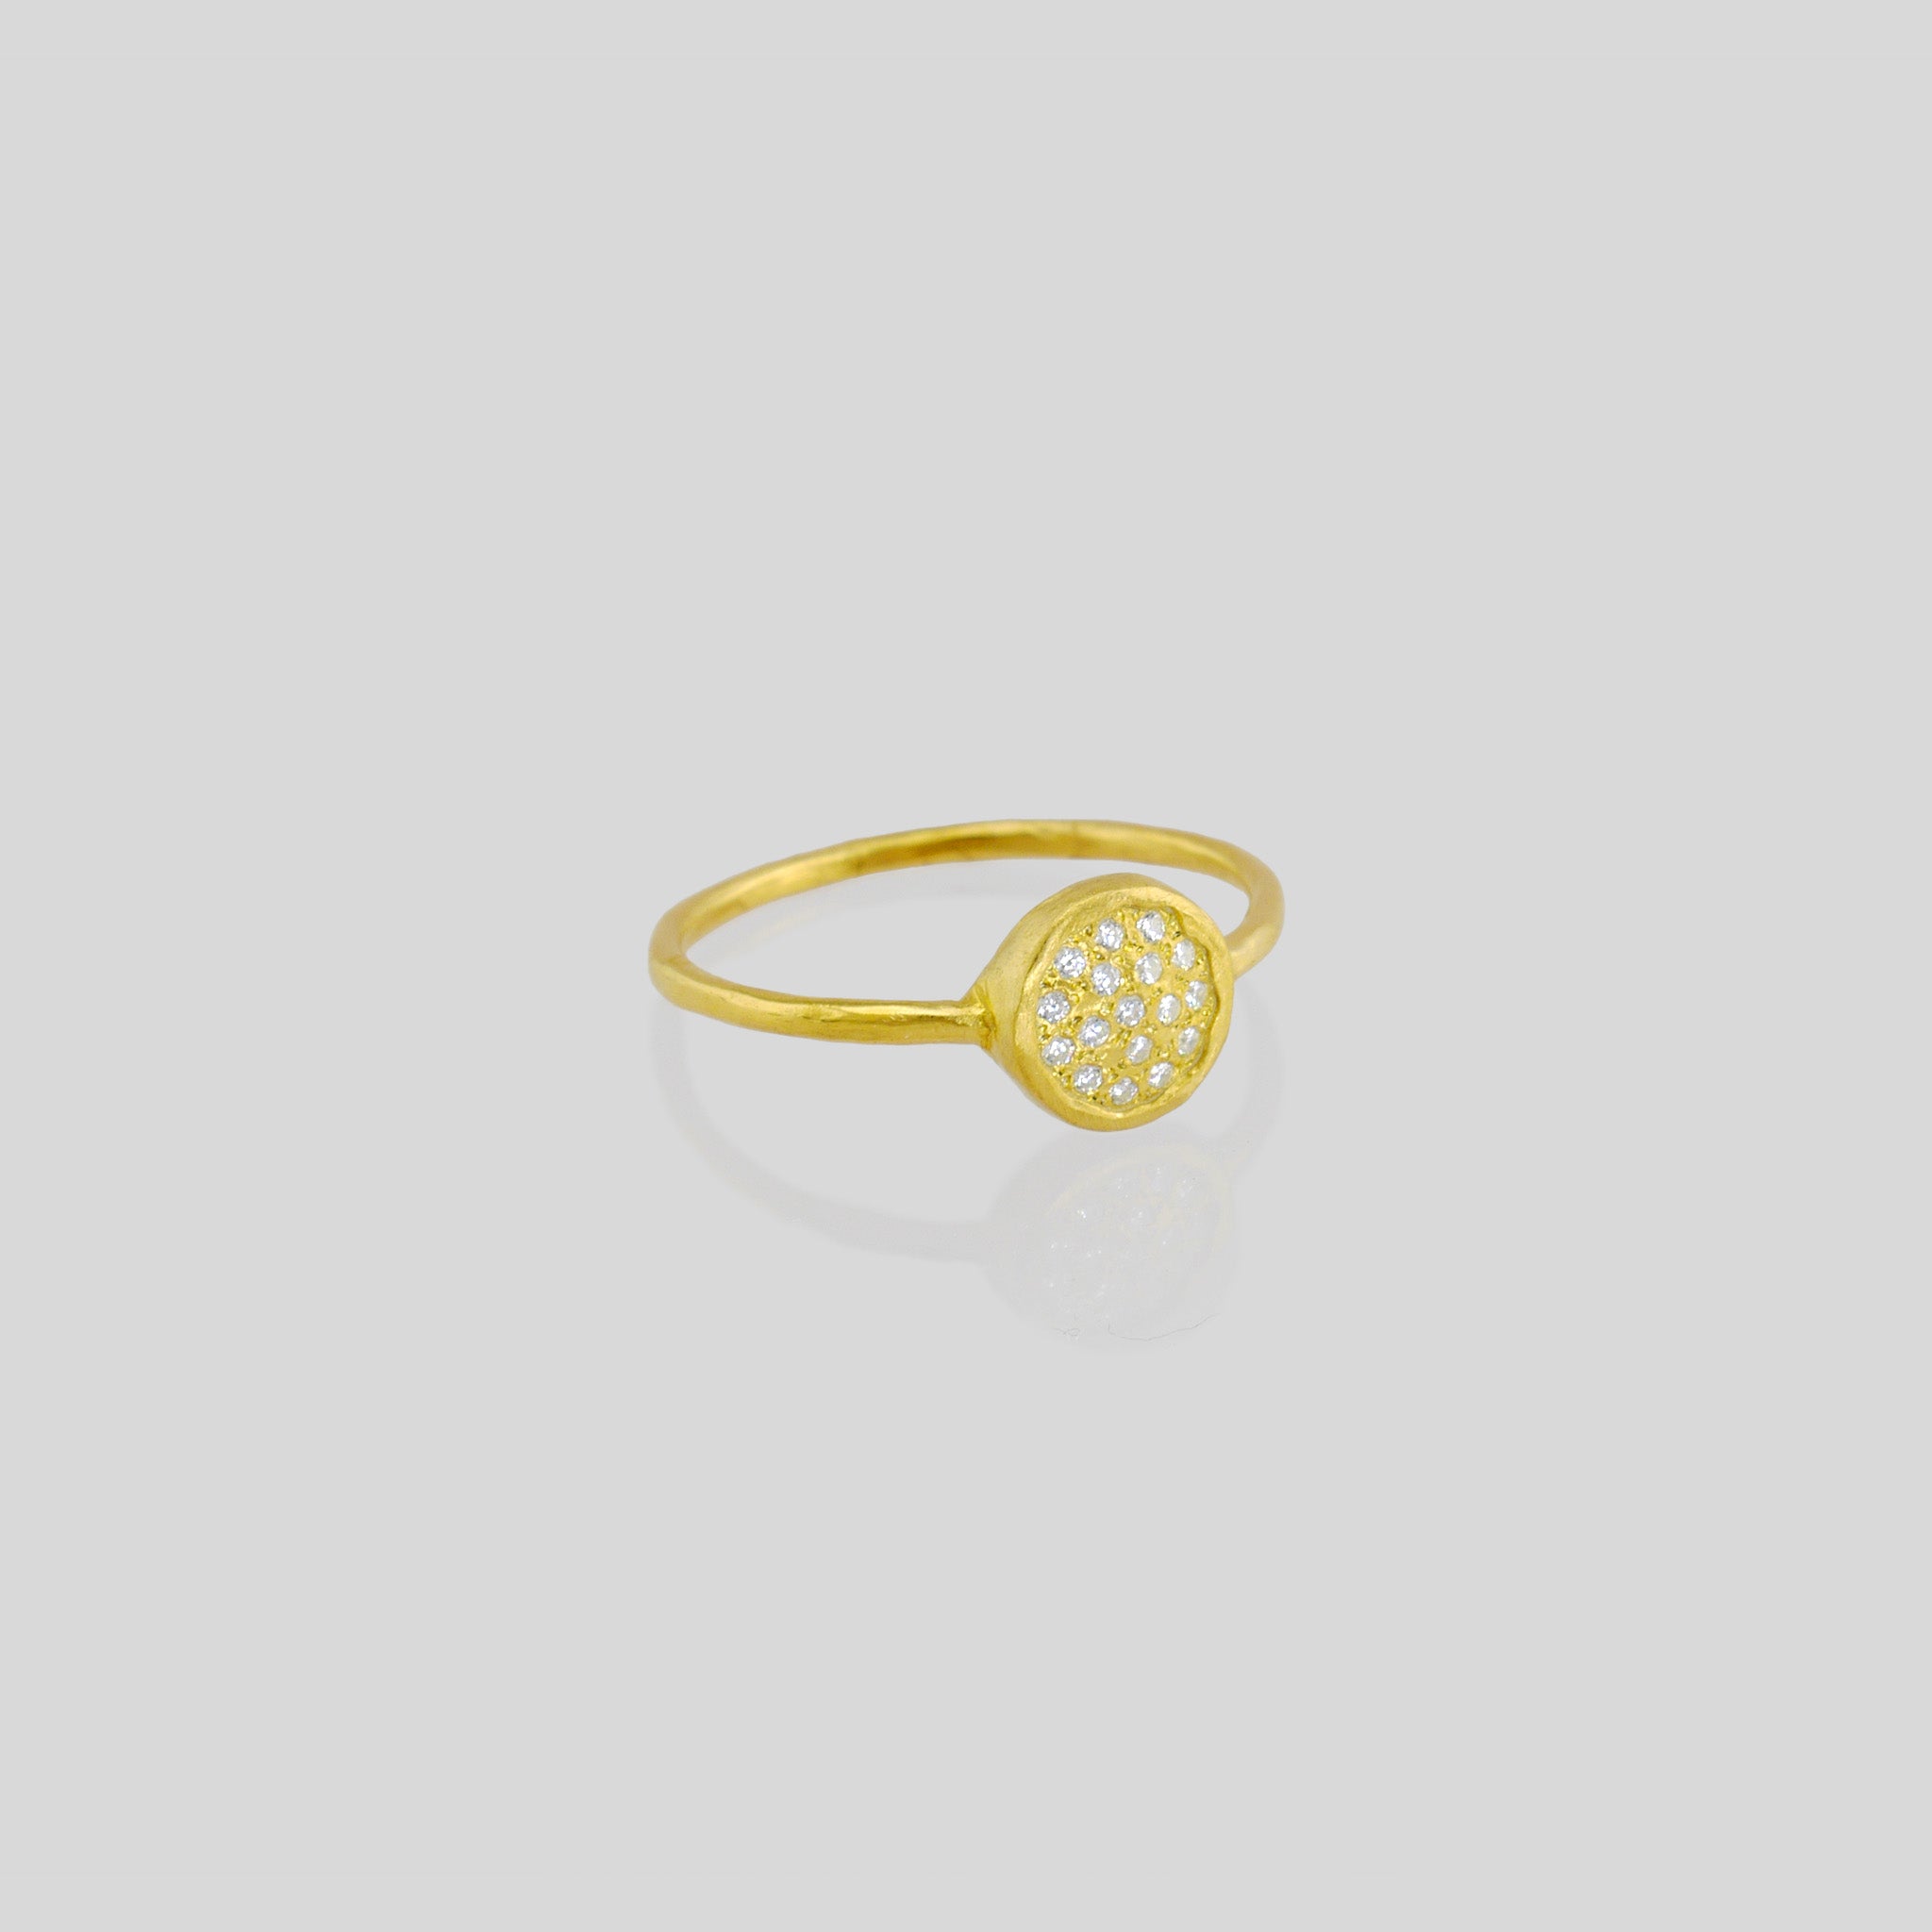 Delicate hand-made 18k Gold ring with a circular plate set with tiny Diamonds. The sparkle from the stones resembles a starry night. 